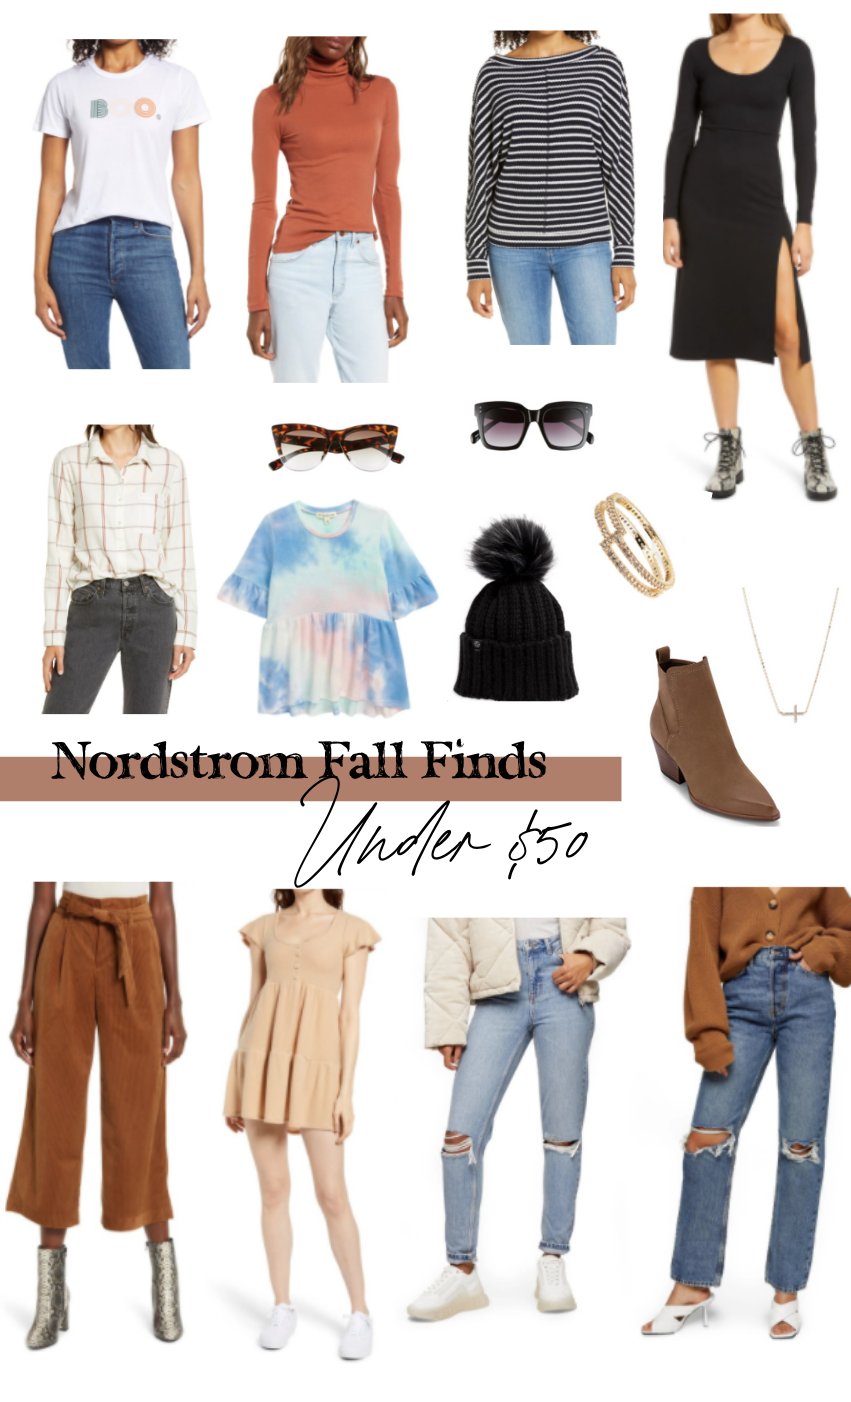 Nordstrom Fall Finds Under $50